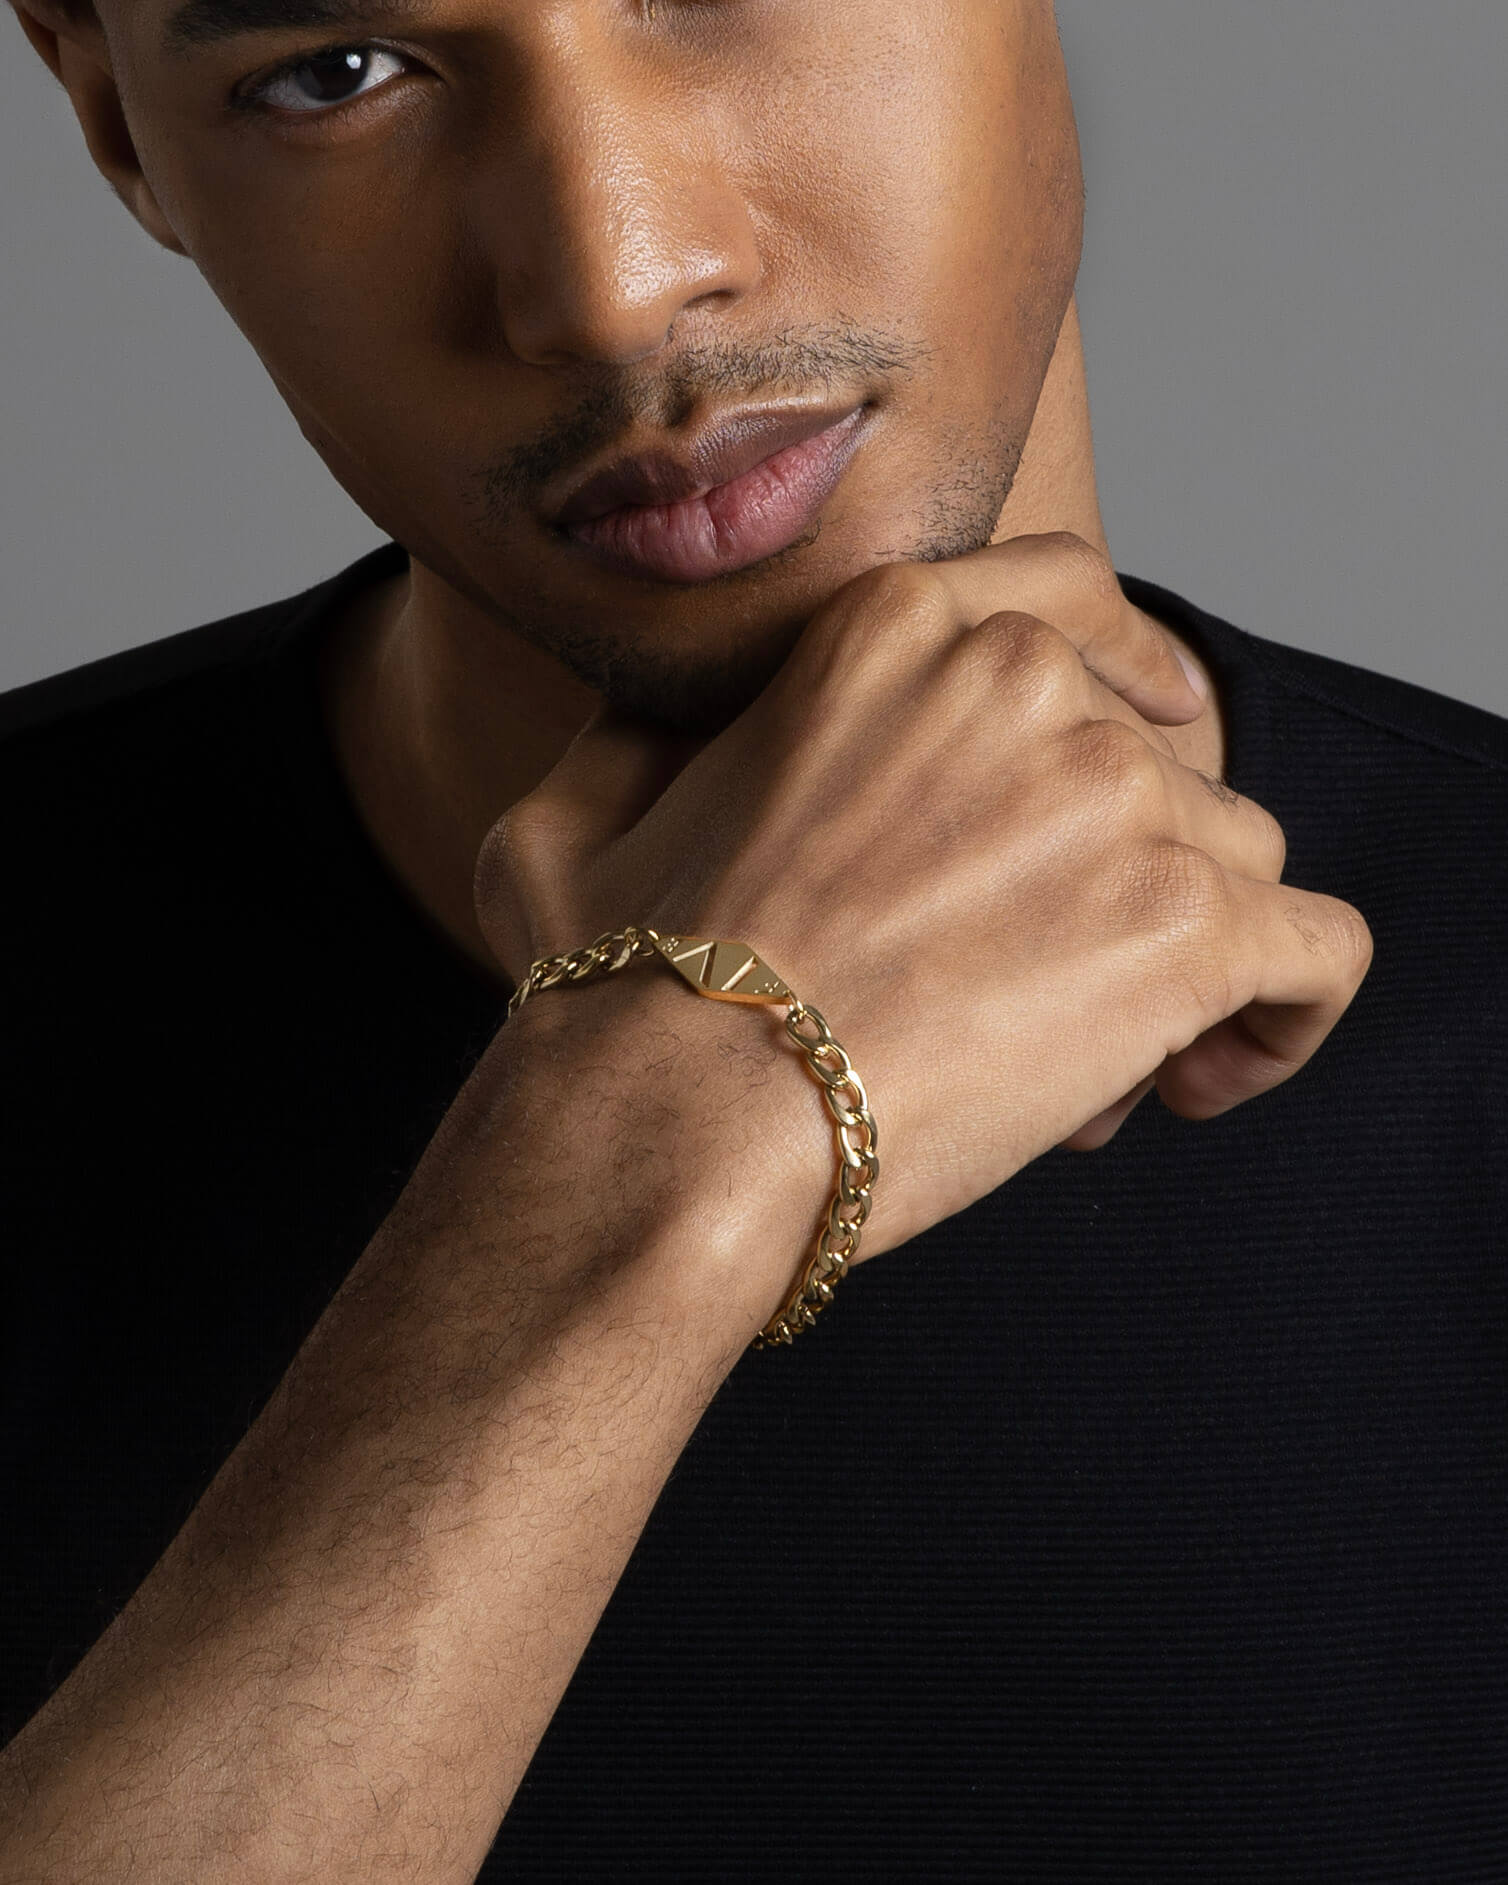 Dal bracelet by Five Jwlry for men, uniquely designed in Montreal, showcasing a wide woven Cuban link chain in silver color, adorned with the brand's signature lozenge logo tag